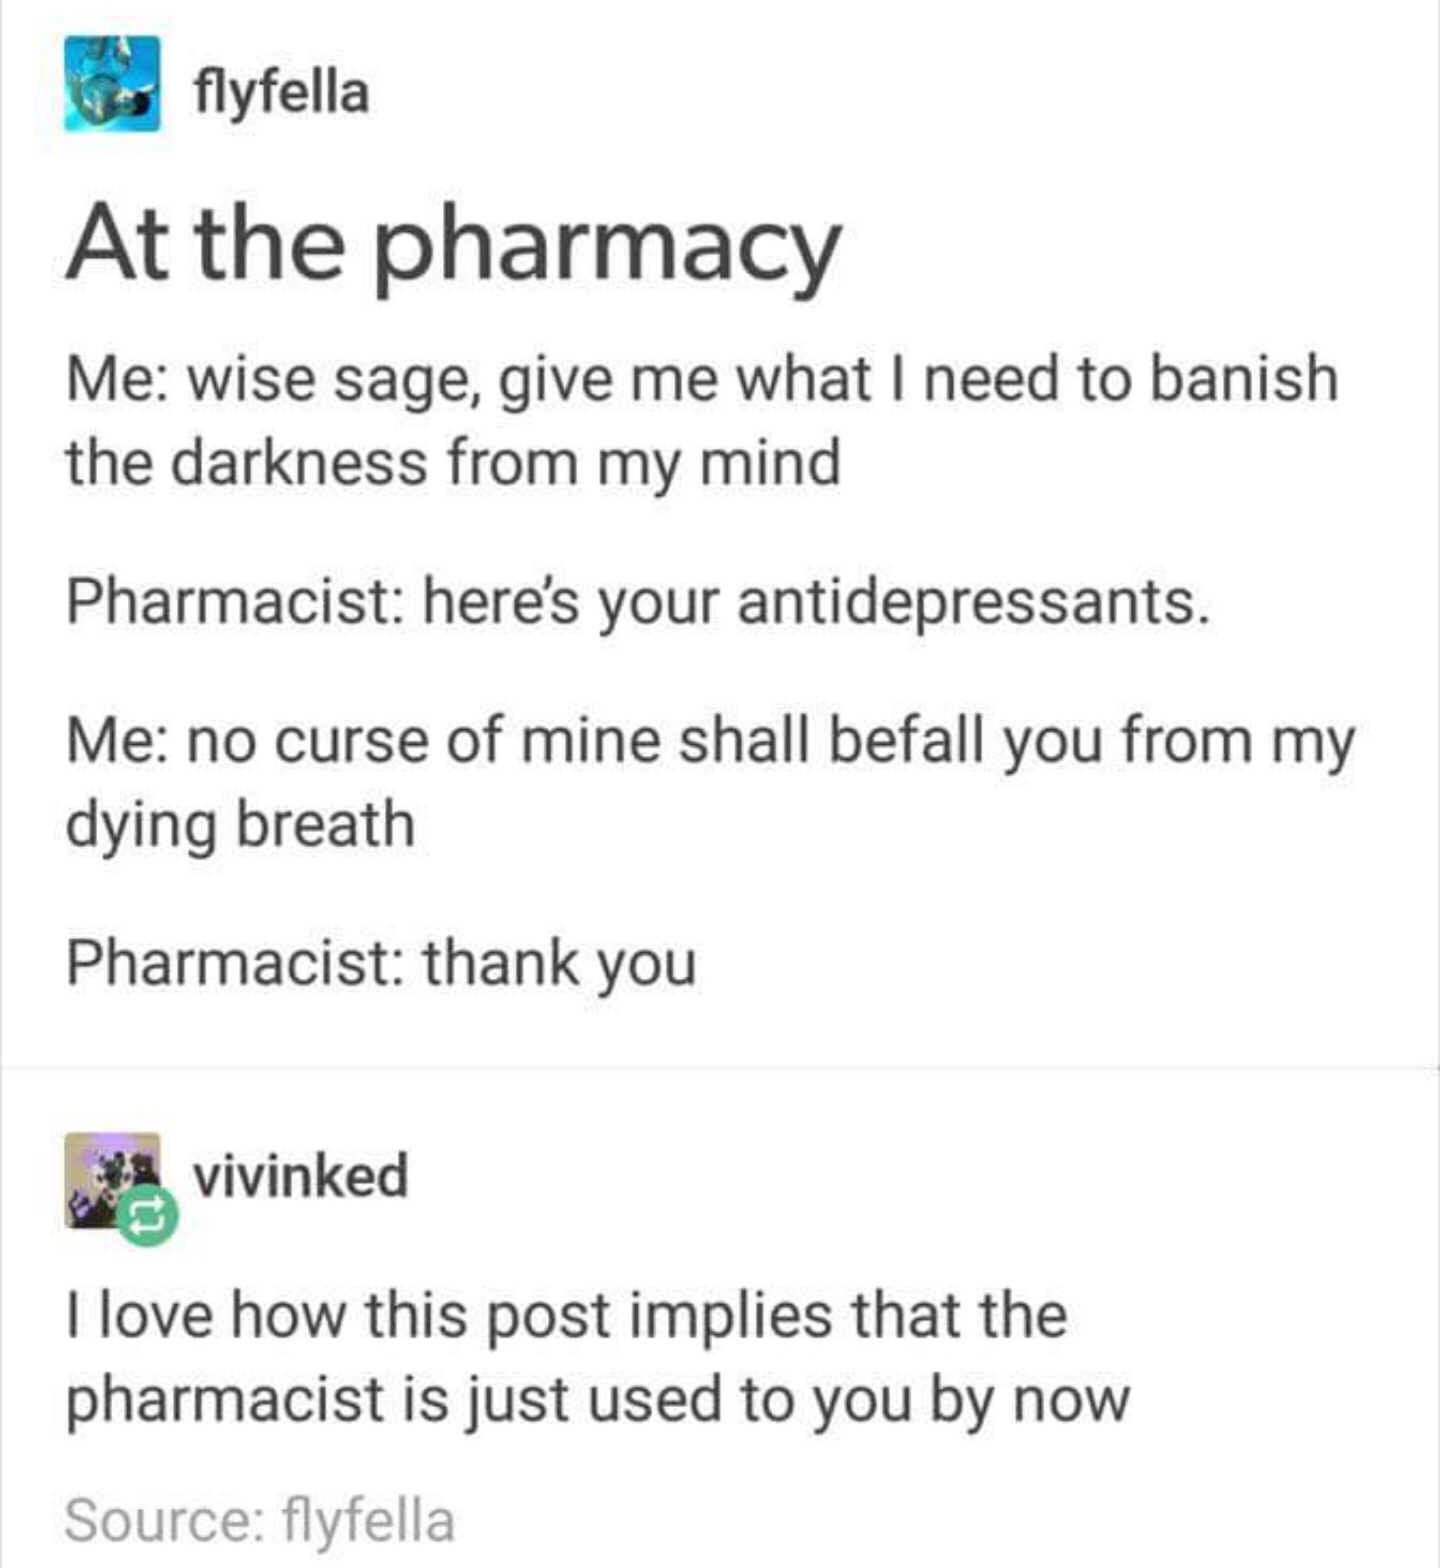 document - flyfella At the pharmacy Me wise sage, give me what I need to banish the darkness from my mind Pharmacist here's your antidepressants. Me no curse of mine shall befall you from my dying breath Pharmacist thank you vivinked I love how this post 